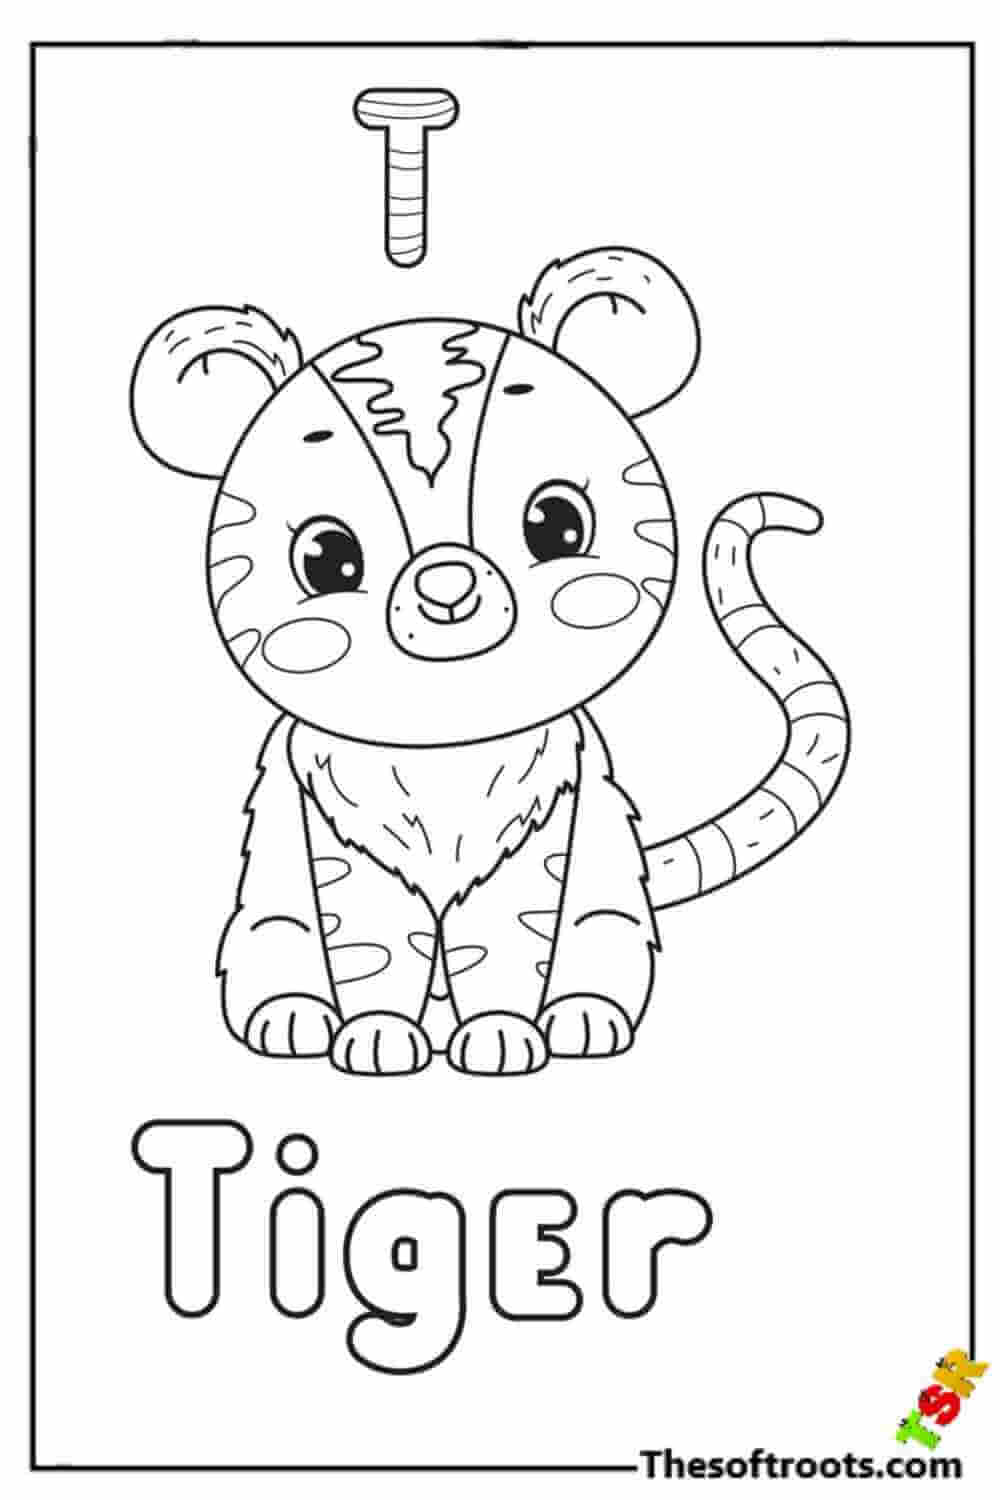 T for Tiger coloring pages